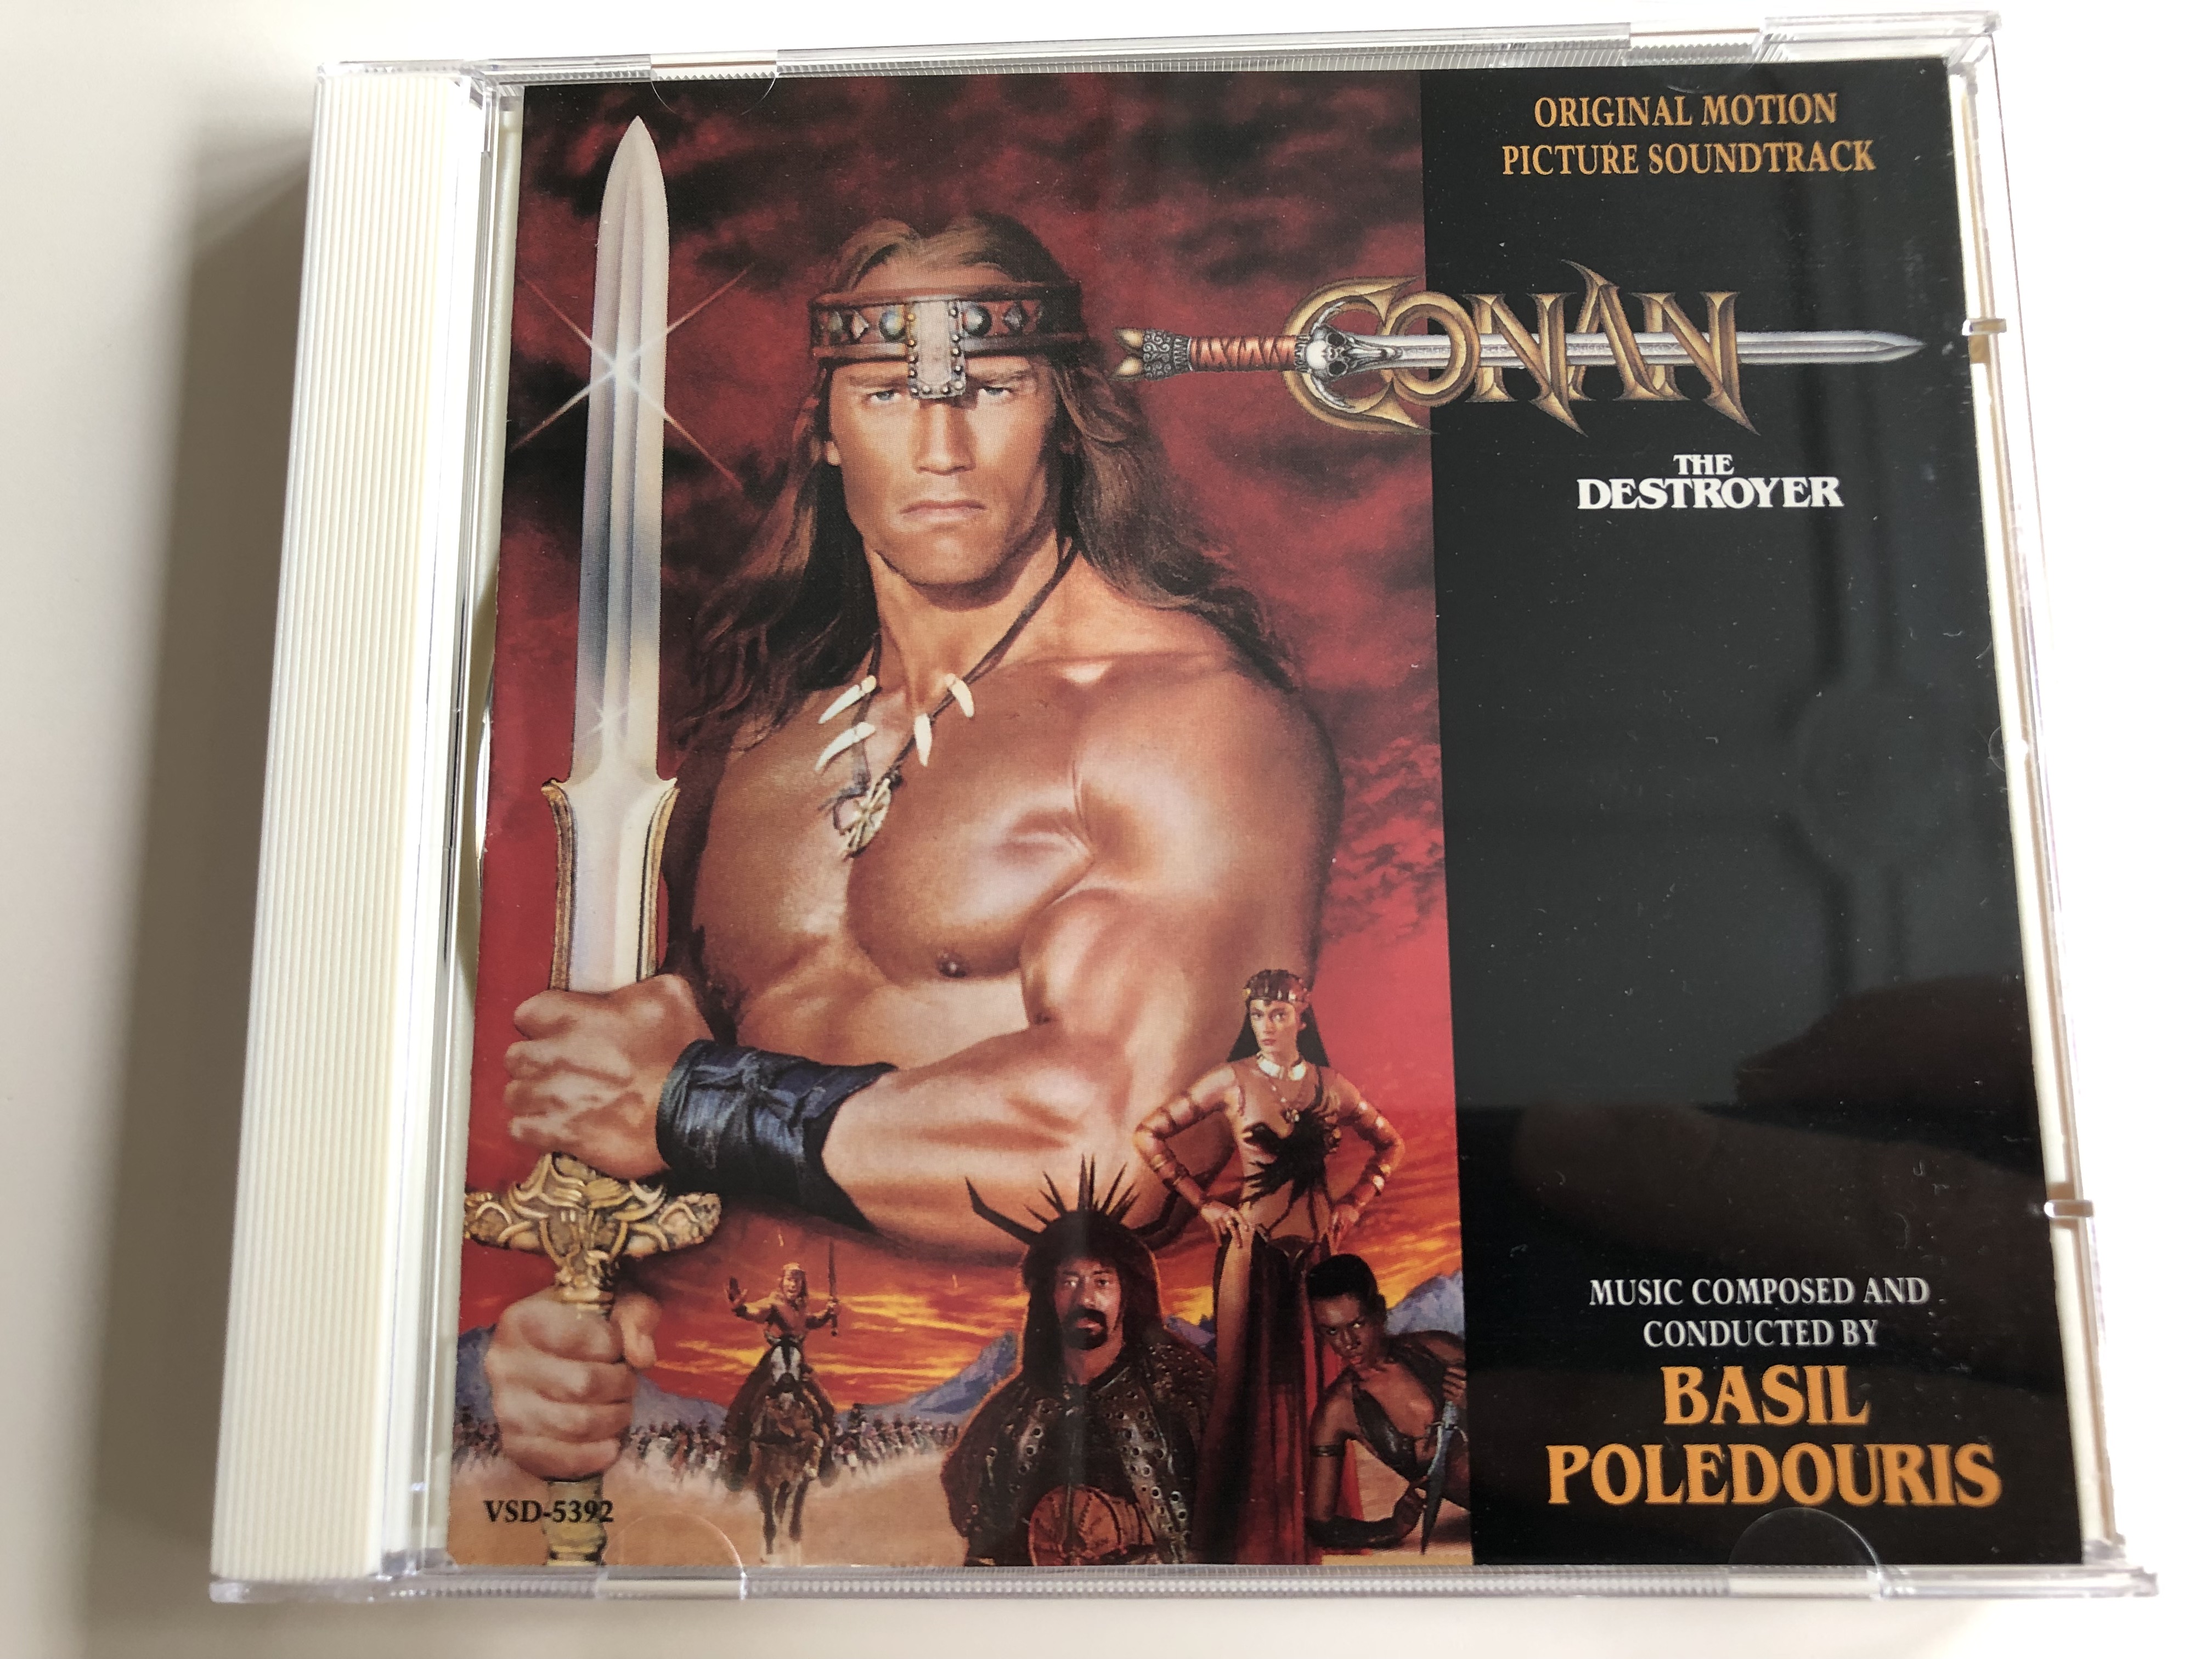 conan-the-destroyer-original-motion-picture-soundtrack-composed-and-conducted-by-basil-poledouris-audio-cd-vsd-5392-1-.jpg